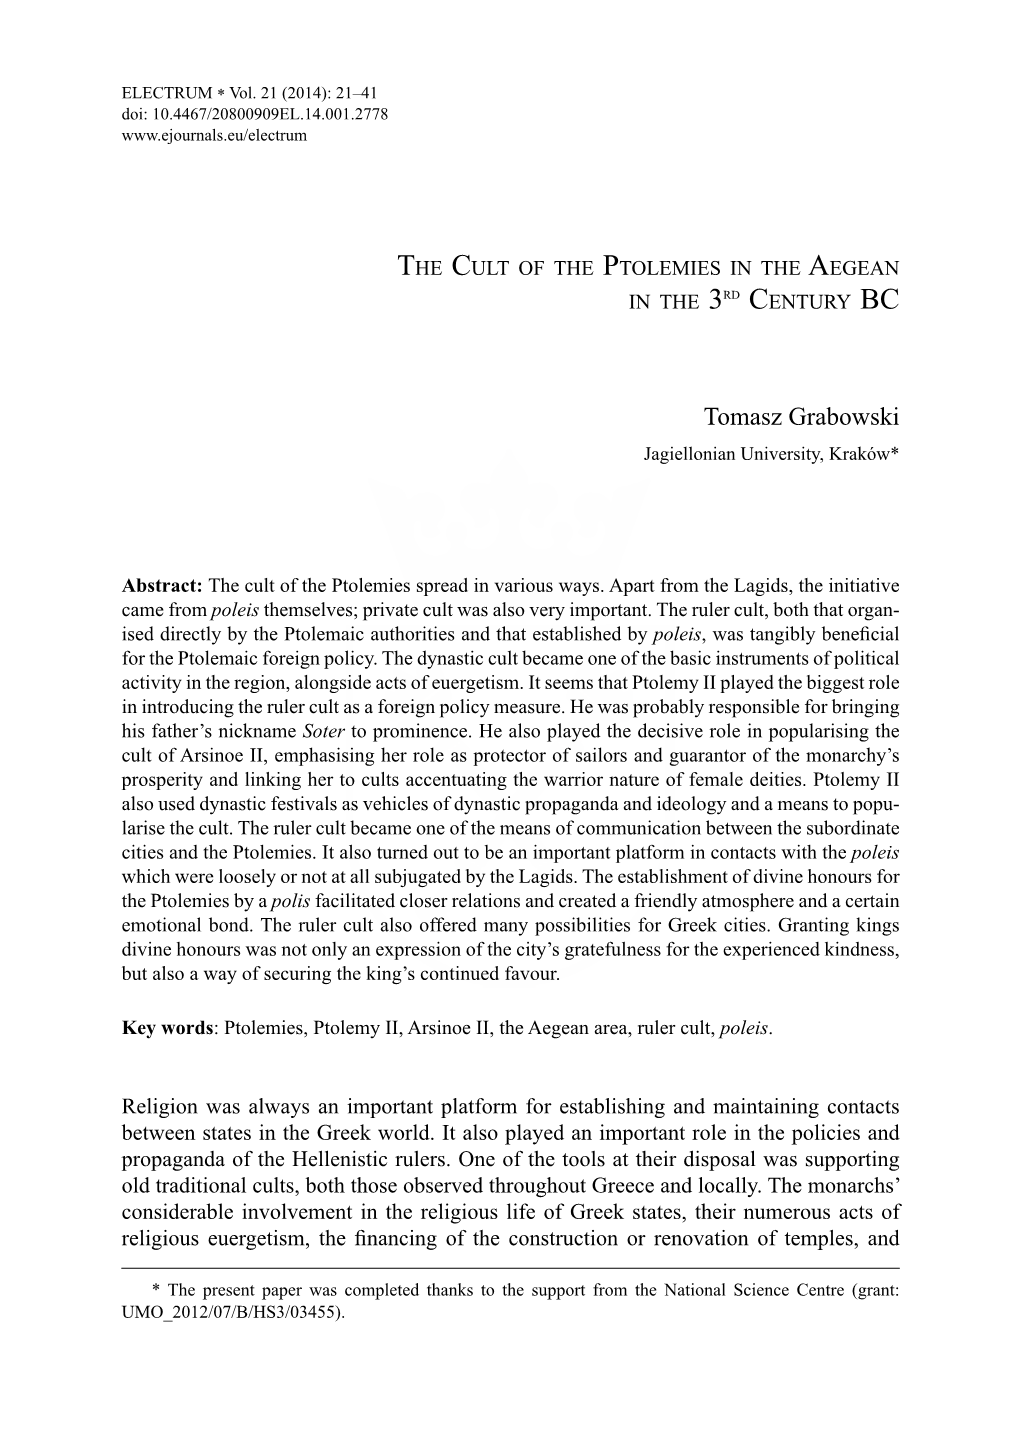 The Cult of the Ptolemies in the Aegean in the 3Rd Century Bc